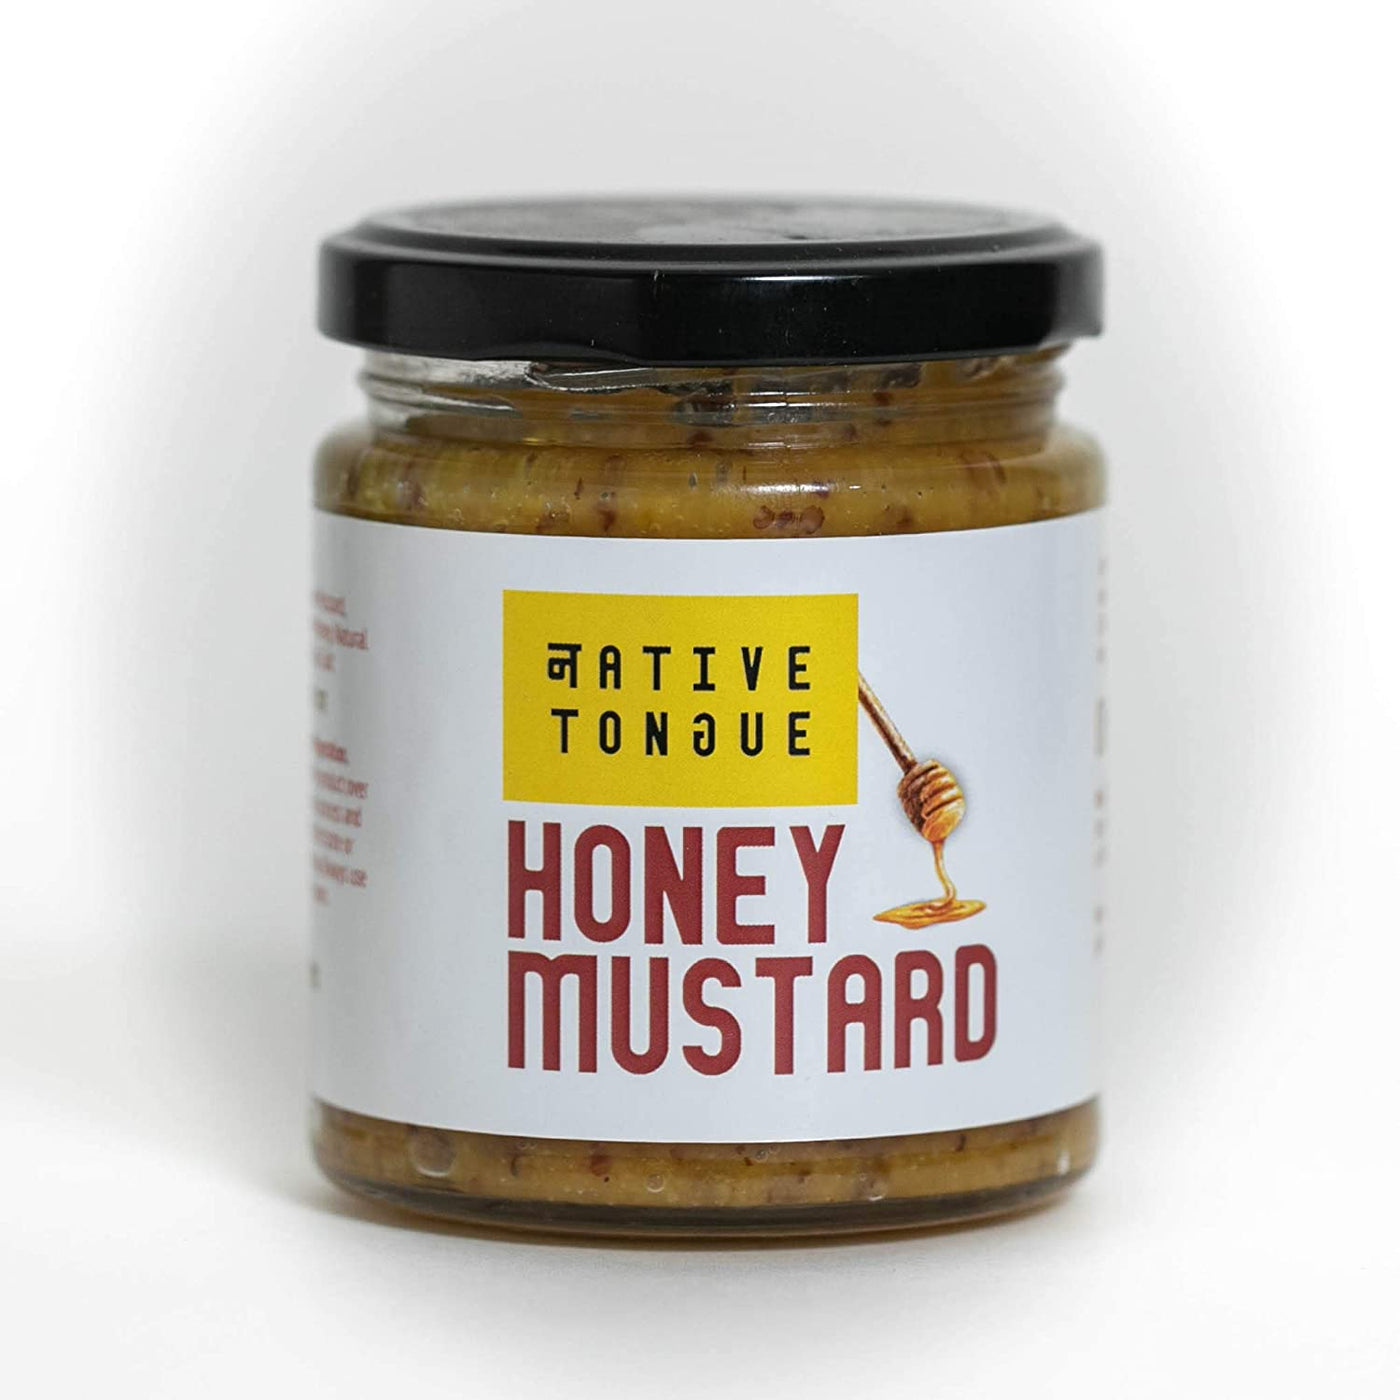 A perfect blend of yellow and brown mustard pickled in local cane vinegar and flavoured with pure Mahableshwar honey, it is stone-ground to a smooth buttery spread that is sure to add a zing to your sandwiches or dips.